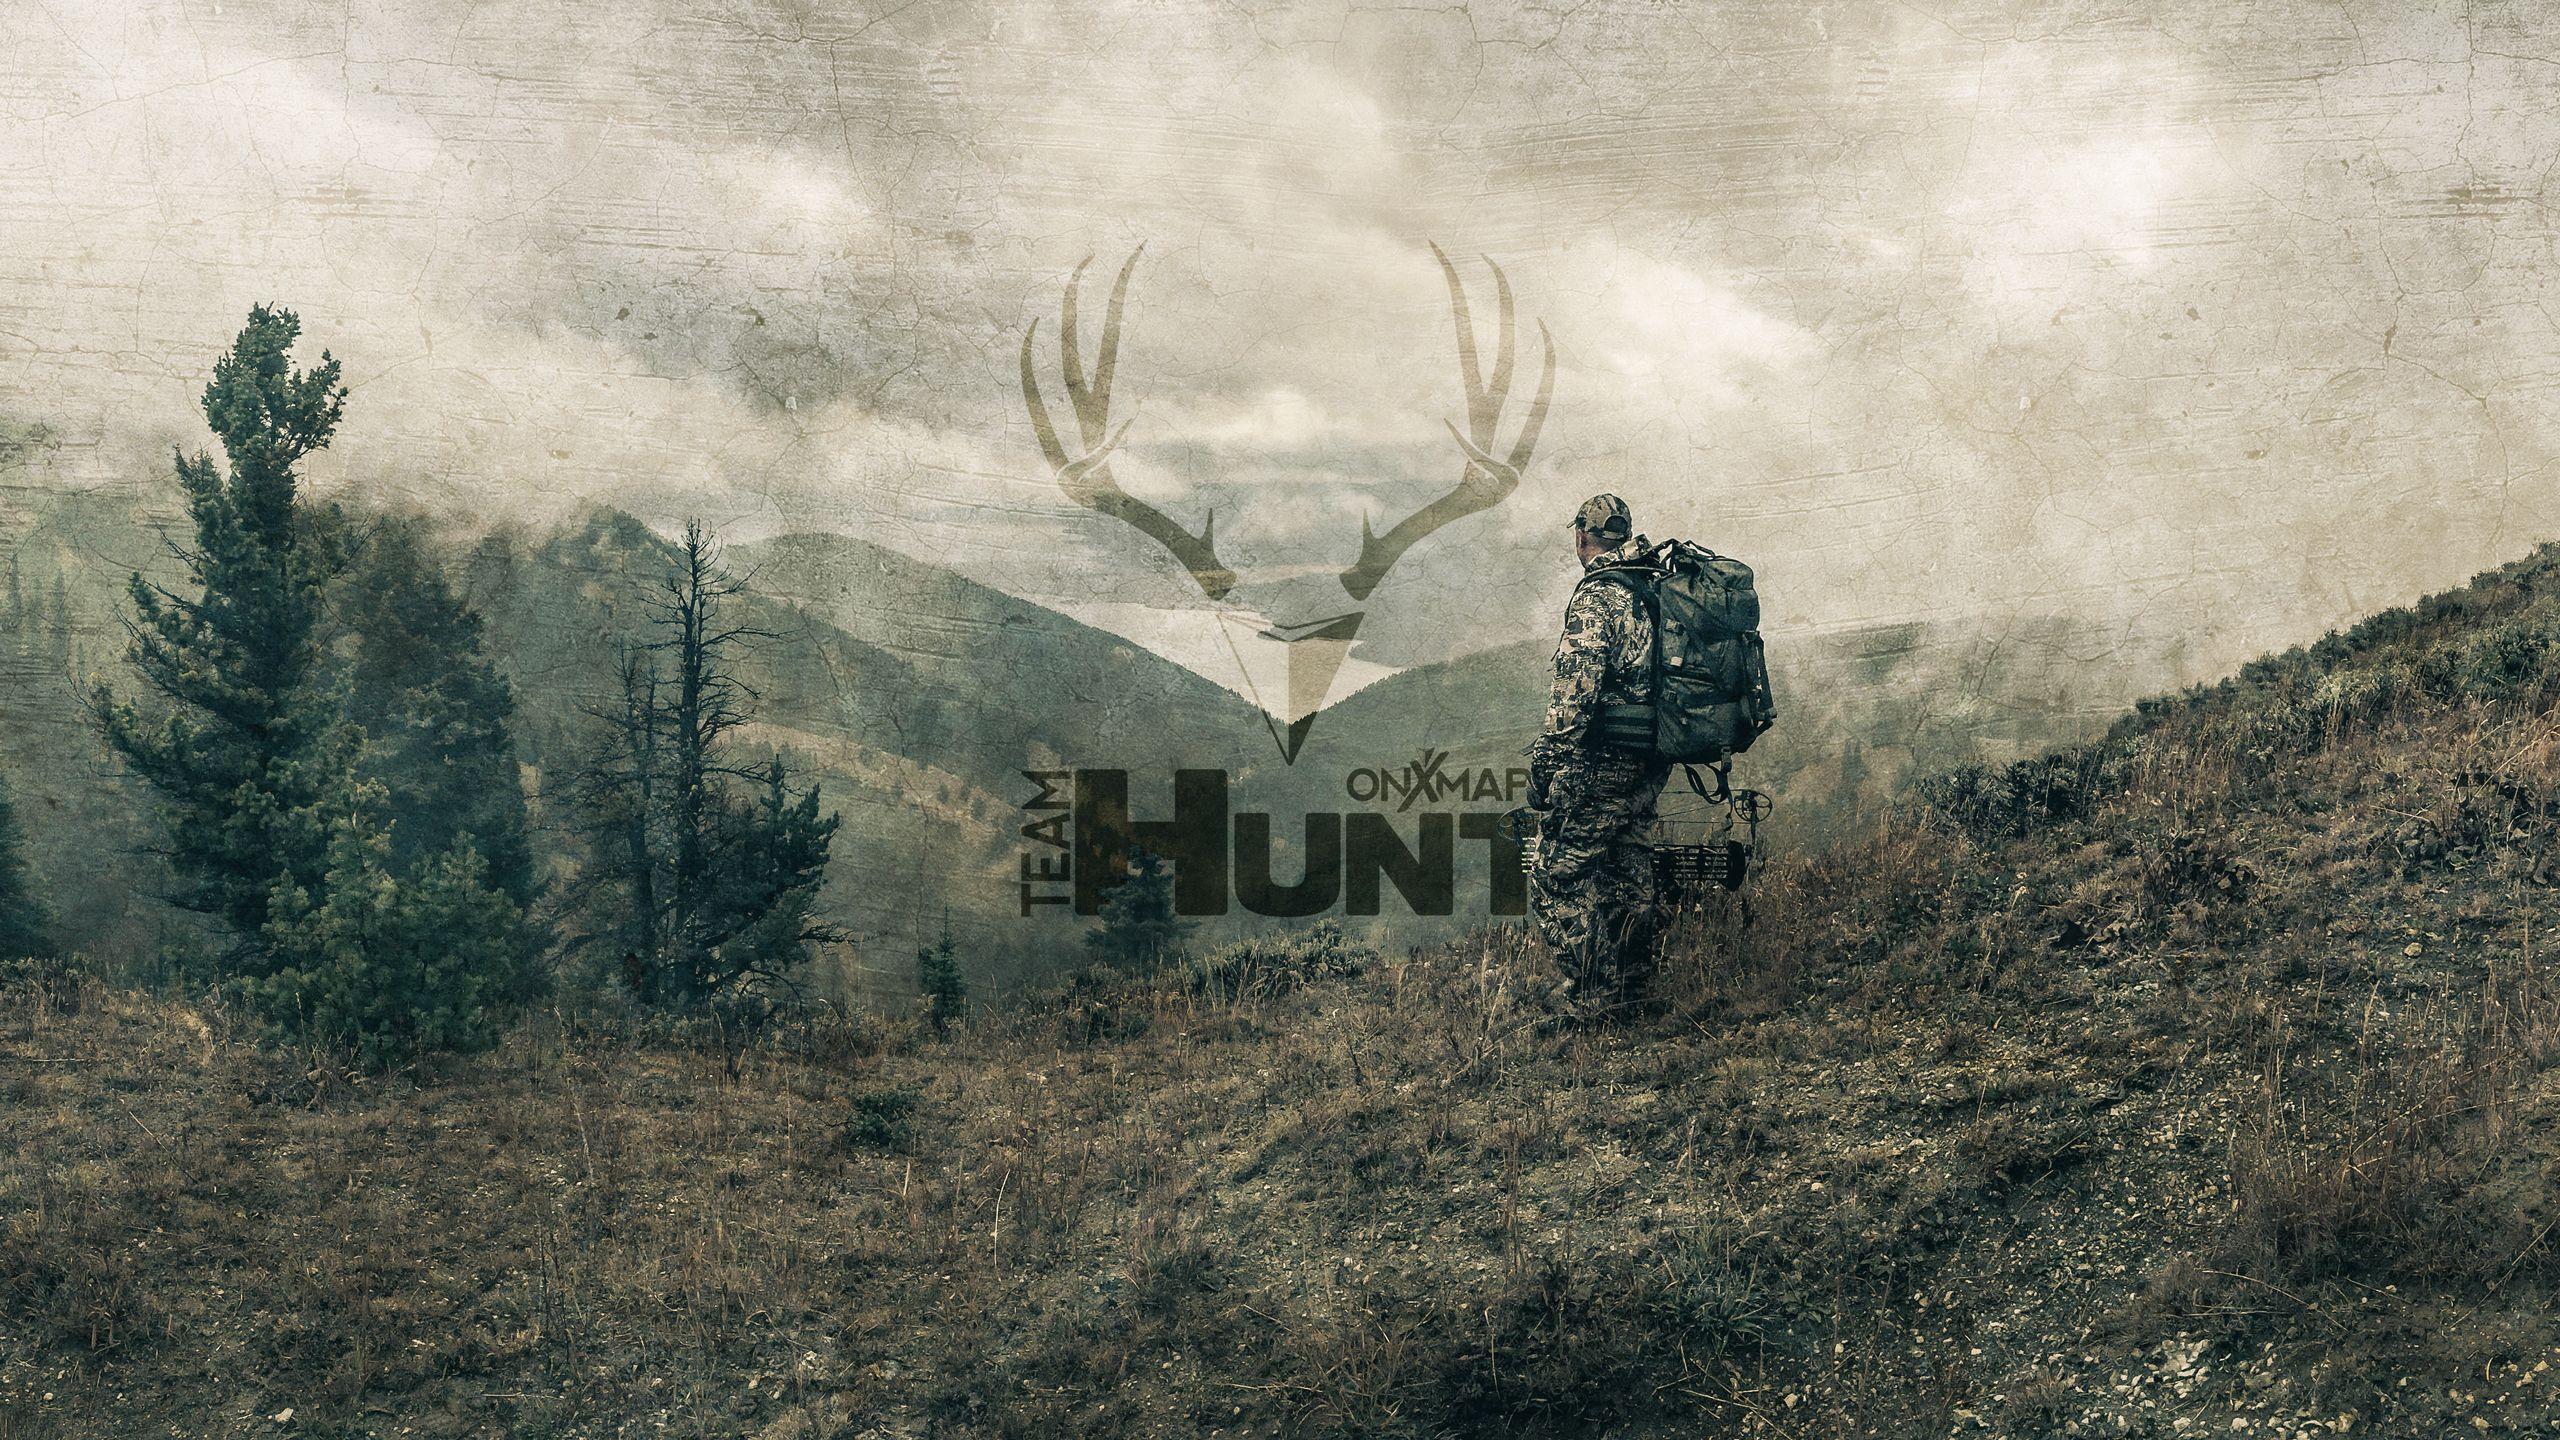 750x1334 Hunting Wallpapers for Apple IPhone 6 6S 7 8 Retina HD